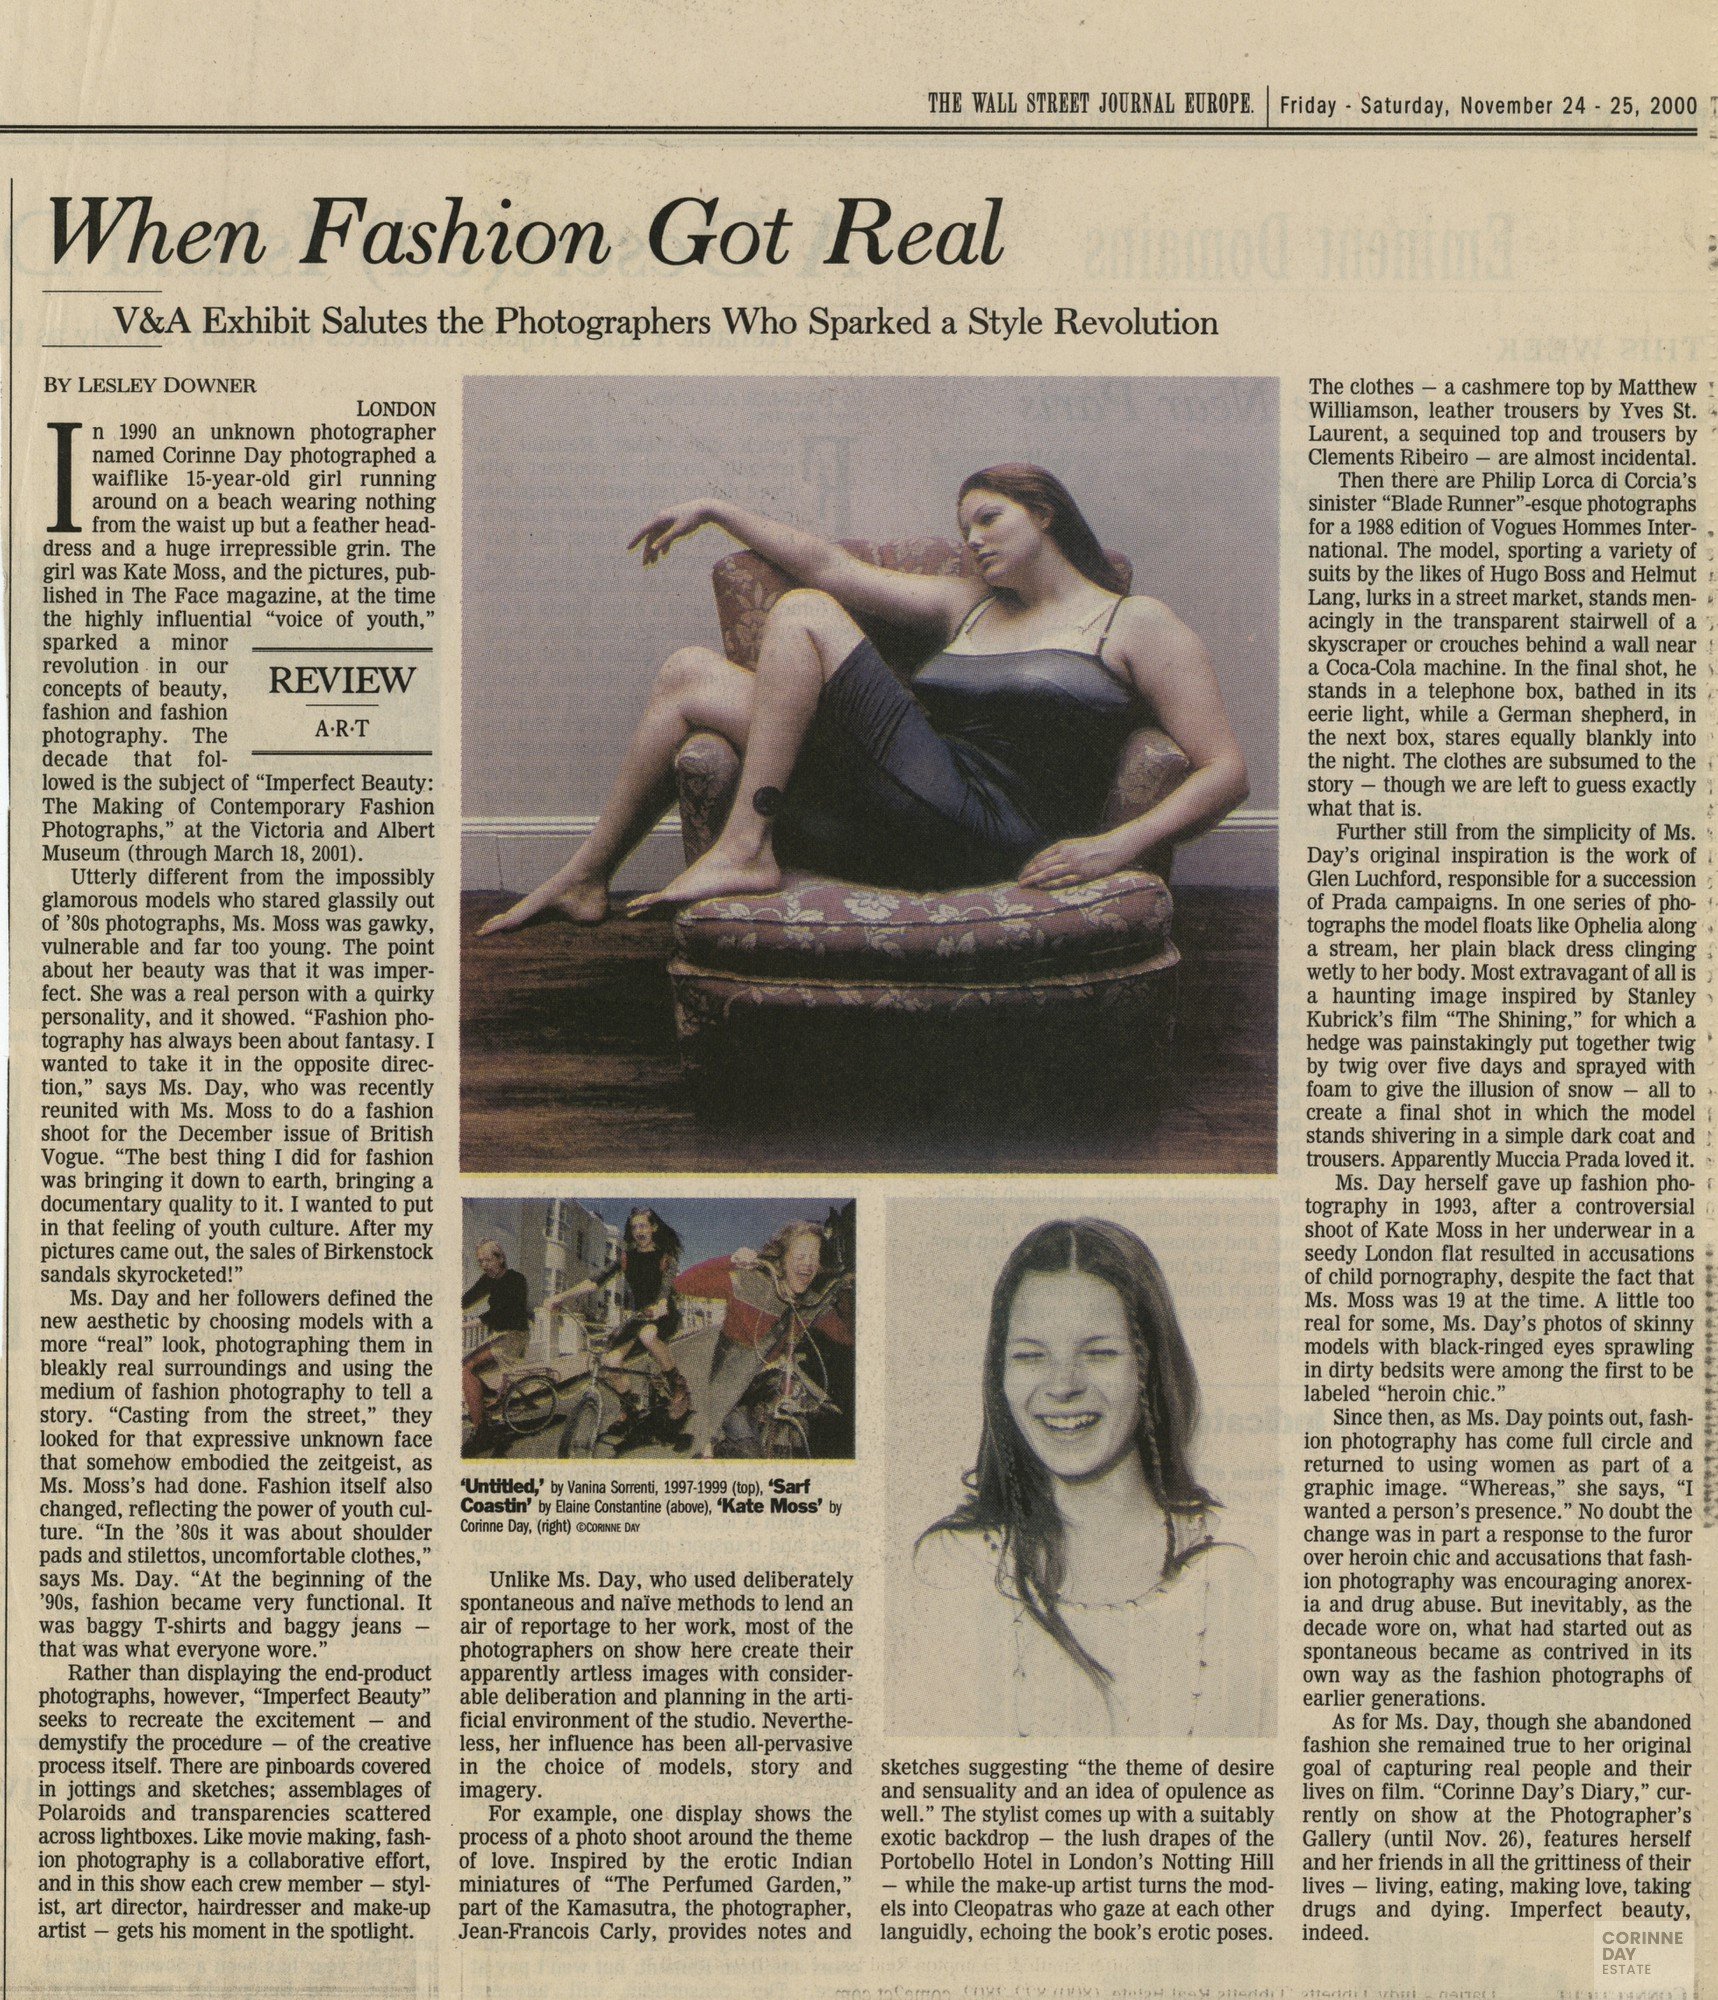 When Fashion Got Real, The Wall Street Journal, Nov 2000 — Image 1 of 1